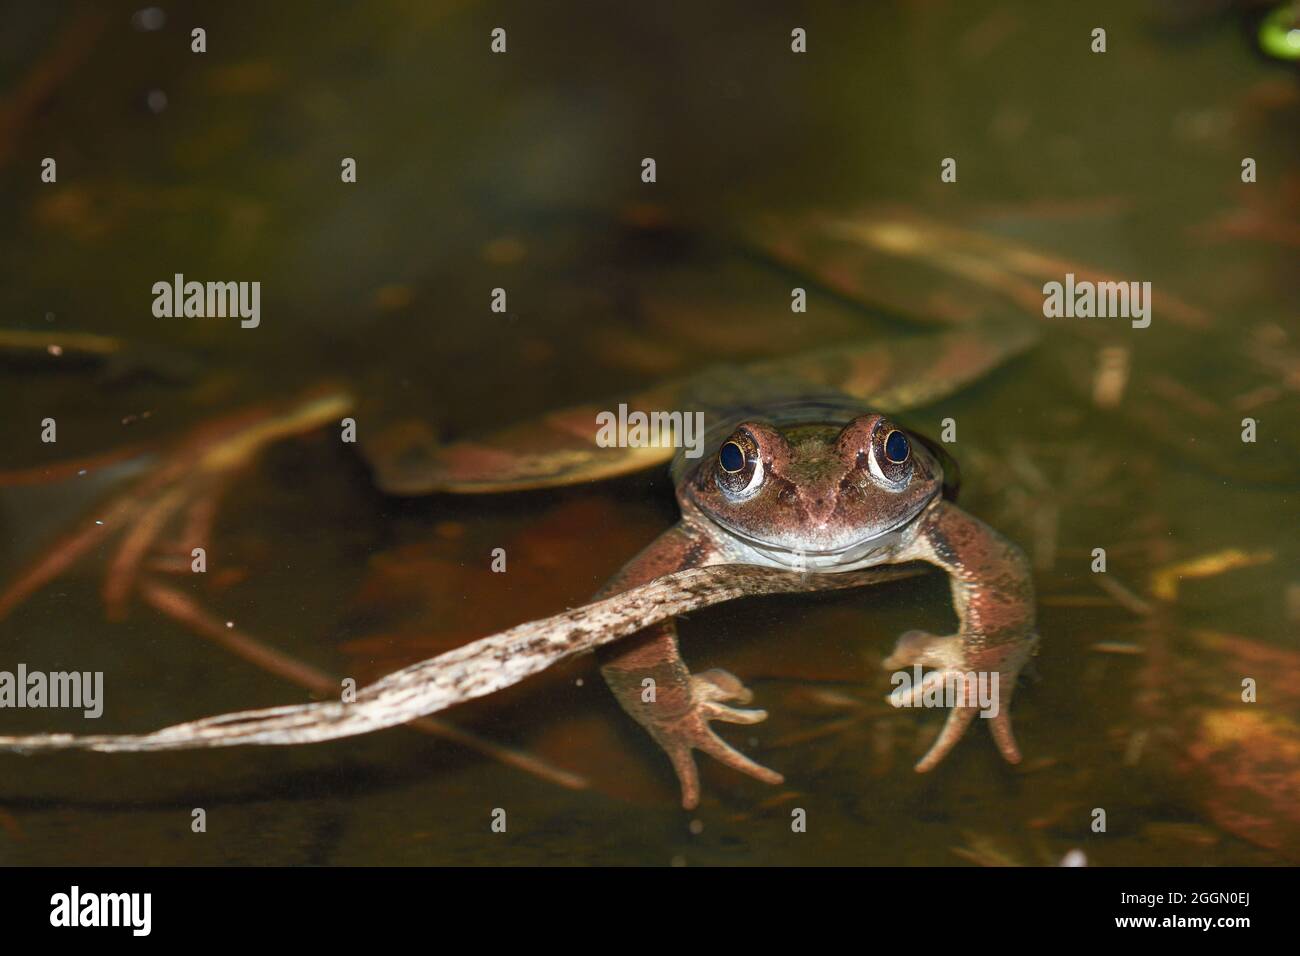 Common frog in its puddle at dusk Stock Photo